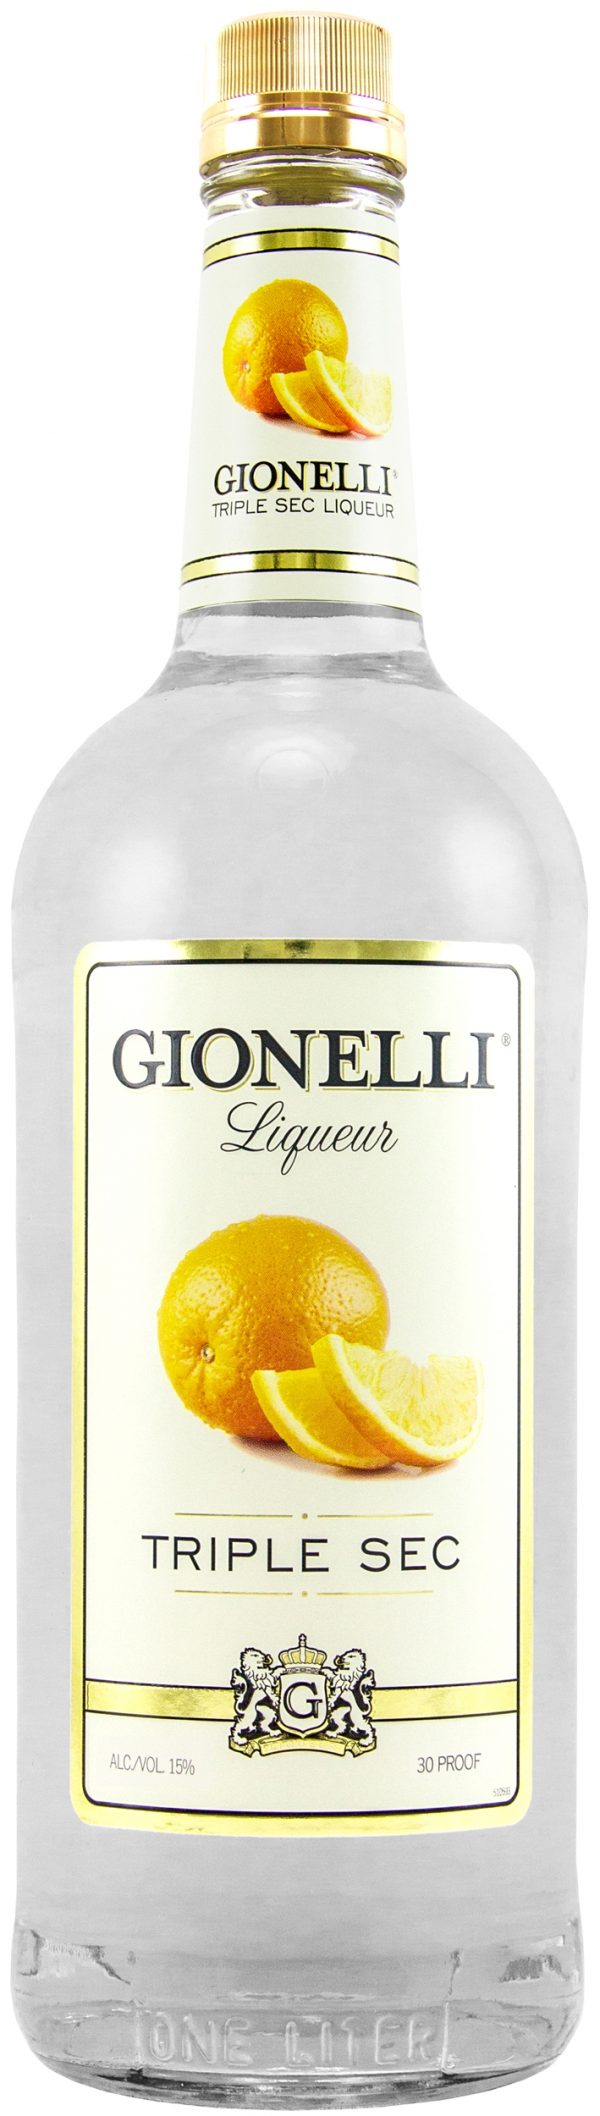 Zoom to enlarge the Gionelli Triple Sec Liqueur